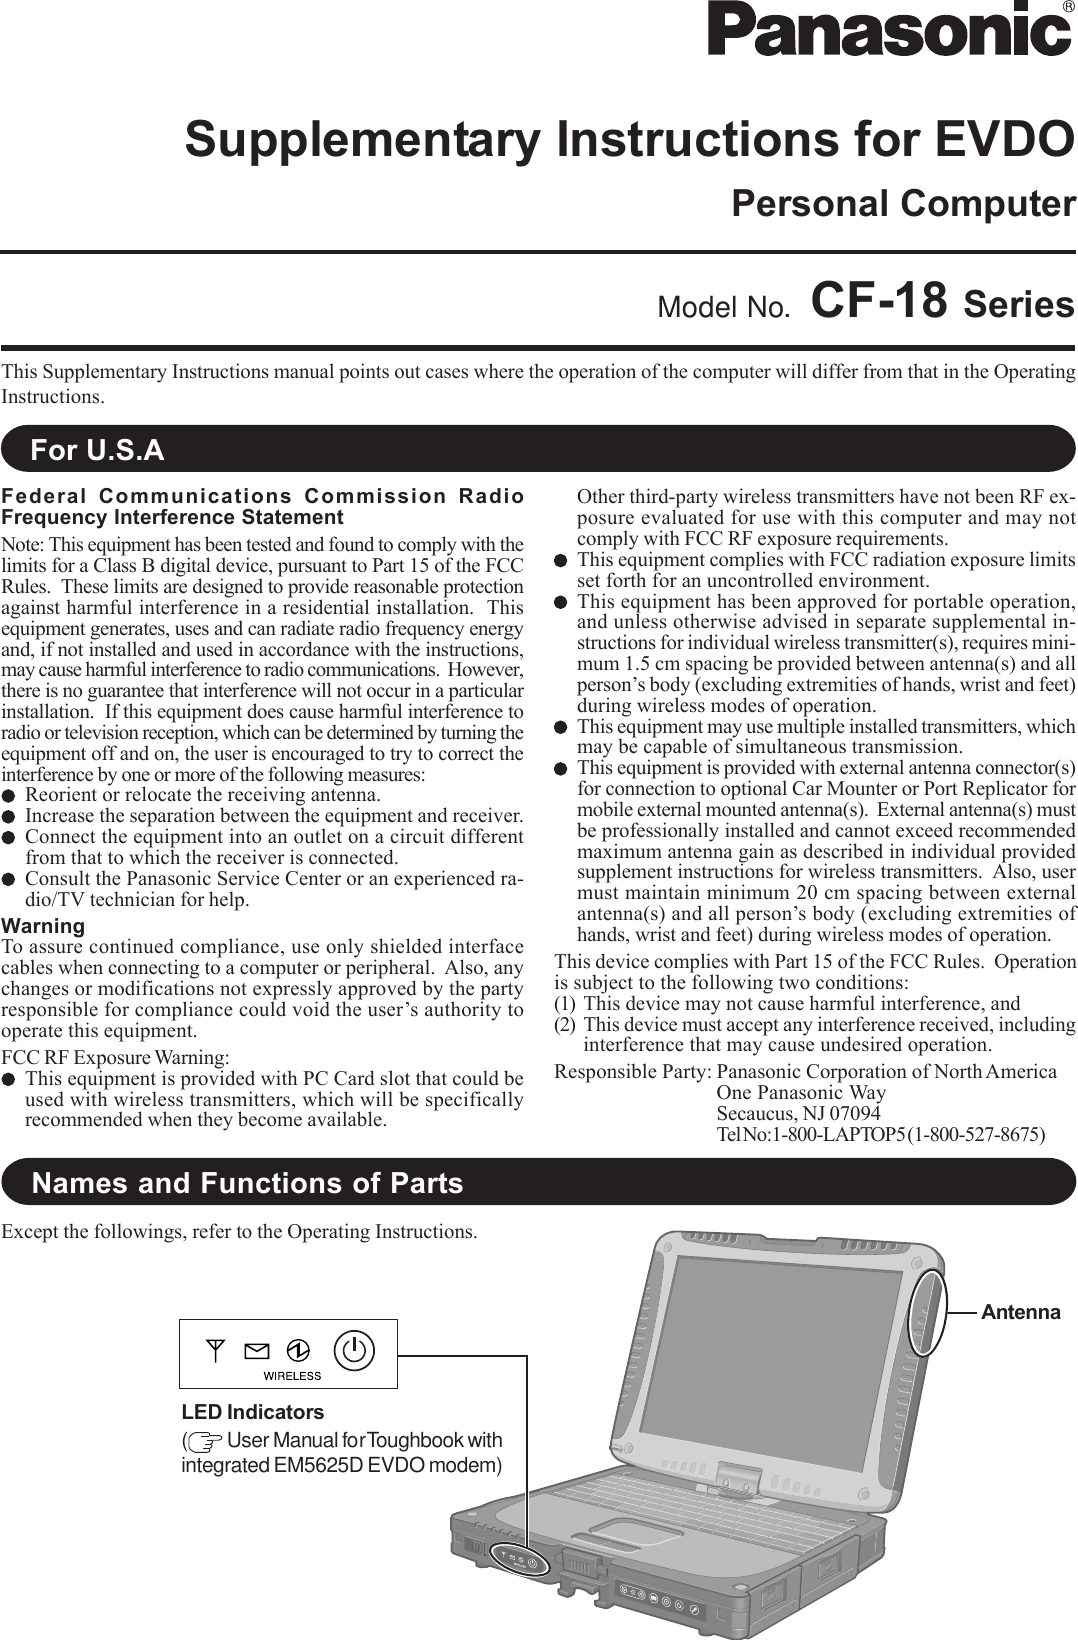 This Supplementary Instructions manual points out cases where the operation of the computer will differ from that in the OperatingInstructions.Model No. CF-18 SeriesFor U.S.ANames and Functions of PartsExcept the followings, refer to the Operating Instructions.AntennaLED Indicators( User Manual for Toughbook withintegrated EM5625D EVDO modem)Federal Communications Commission RadioFrequency Interference StatementNote: This equipment has been tested and found to comply with thelimits for a Class B digital device, pursuant to Part 15 of the FCCRules.  These limits are designed to provide reasonable protectionagainst harmful interference in a residential installation.  Thisequipment generates, uses and can radiate radio frequency energyand, if not installed and used in accordance with the instructions,may cause harmful interference to radio communications.  However,there is no guarantee that interference will not occur in a particularinstallation.  If this equipment does cause harmful interference toradio or television reception, which can be determined by turning theequipment off and on, the user is encouraged to try to correct theinterference by one or more of the following measures:Reorient or relocate the receiving antenna.Increase the separation between the equipment and receiver.Connect the equipment into an outlet on a circuit differentfrom that to which the receiver is connected.Consult the Panasonic Service Center or an experienced ra-dio/TV technician for help.WarningTo assure continued compliance, use only shielded interfacecables when connecting to a computer or peripheral.  Also, anychanges or modifications not expressly approved by the partyresponsible for compliance could void the user’s authority tooperate this equipment.FCC RF Exposure Warning:This equipment is provided with PC Card slot that could beused with wireless transmitters, which will be specificallyrecommended when they become available.Other third-party wireless transmitters have not been RF ex-posure evaluated for use with this computer and may notcomply with FCC RF exposure requirements.This equipment complies with FCC radiation exposure limitsset forth for an uncontrolled environment.This equipment has been approved for portable operation,and unless otherwise advised in separate supplemental in-structions for individual wireless transmitter(s), requires mini-mum 1.5 cm spacing be provided between antenna(s) and allperson’s body (excluding extremities of hands, wrist and feet)during wireless modes of operation.This equipment may use multiple installed transmitters, whichmay be capable of simultaneous transmission.This equipment is provided with external antenna connector(s)for connection to optional Car Mounter or Port Replicator formobile external mounted antenna(s).  External antenna(s) mustbe professionally installed and cannot exceed recommendedmaximum antenna gain as described in individual providedsupplement instructions for wireless transmitters.  Also, usermust maintain minimum 20 cm spacing between externalantenna(s) and all person’s body (excluding extremities ofhands, wrist and feet) during wireless modes of operation.This device complies with Part 15 of the FCC Rules.  Operationis subject to the following two conditions:(1) This device may not cause harmful interference, and(2) This device must accept any interference received, includinginterference that may cause undesired operation.Responsible Party: Panasonic Corporation of North AmericaOne Panasonic WaySecaucus, NJ 07094Tel No:1-800-LAPTOP5 (1-800-527-8675)Personal ComputerSupplementary Instructions for EVDO